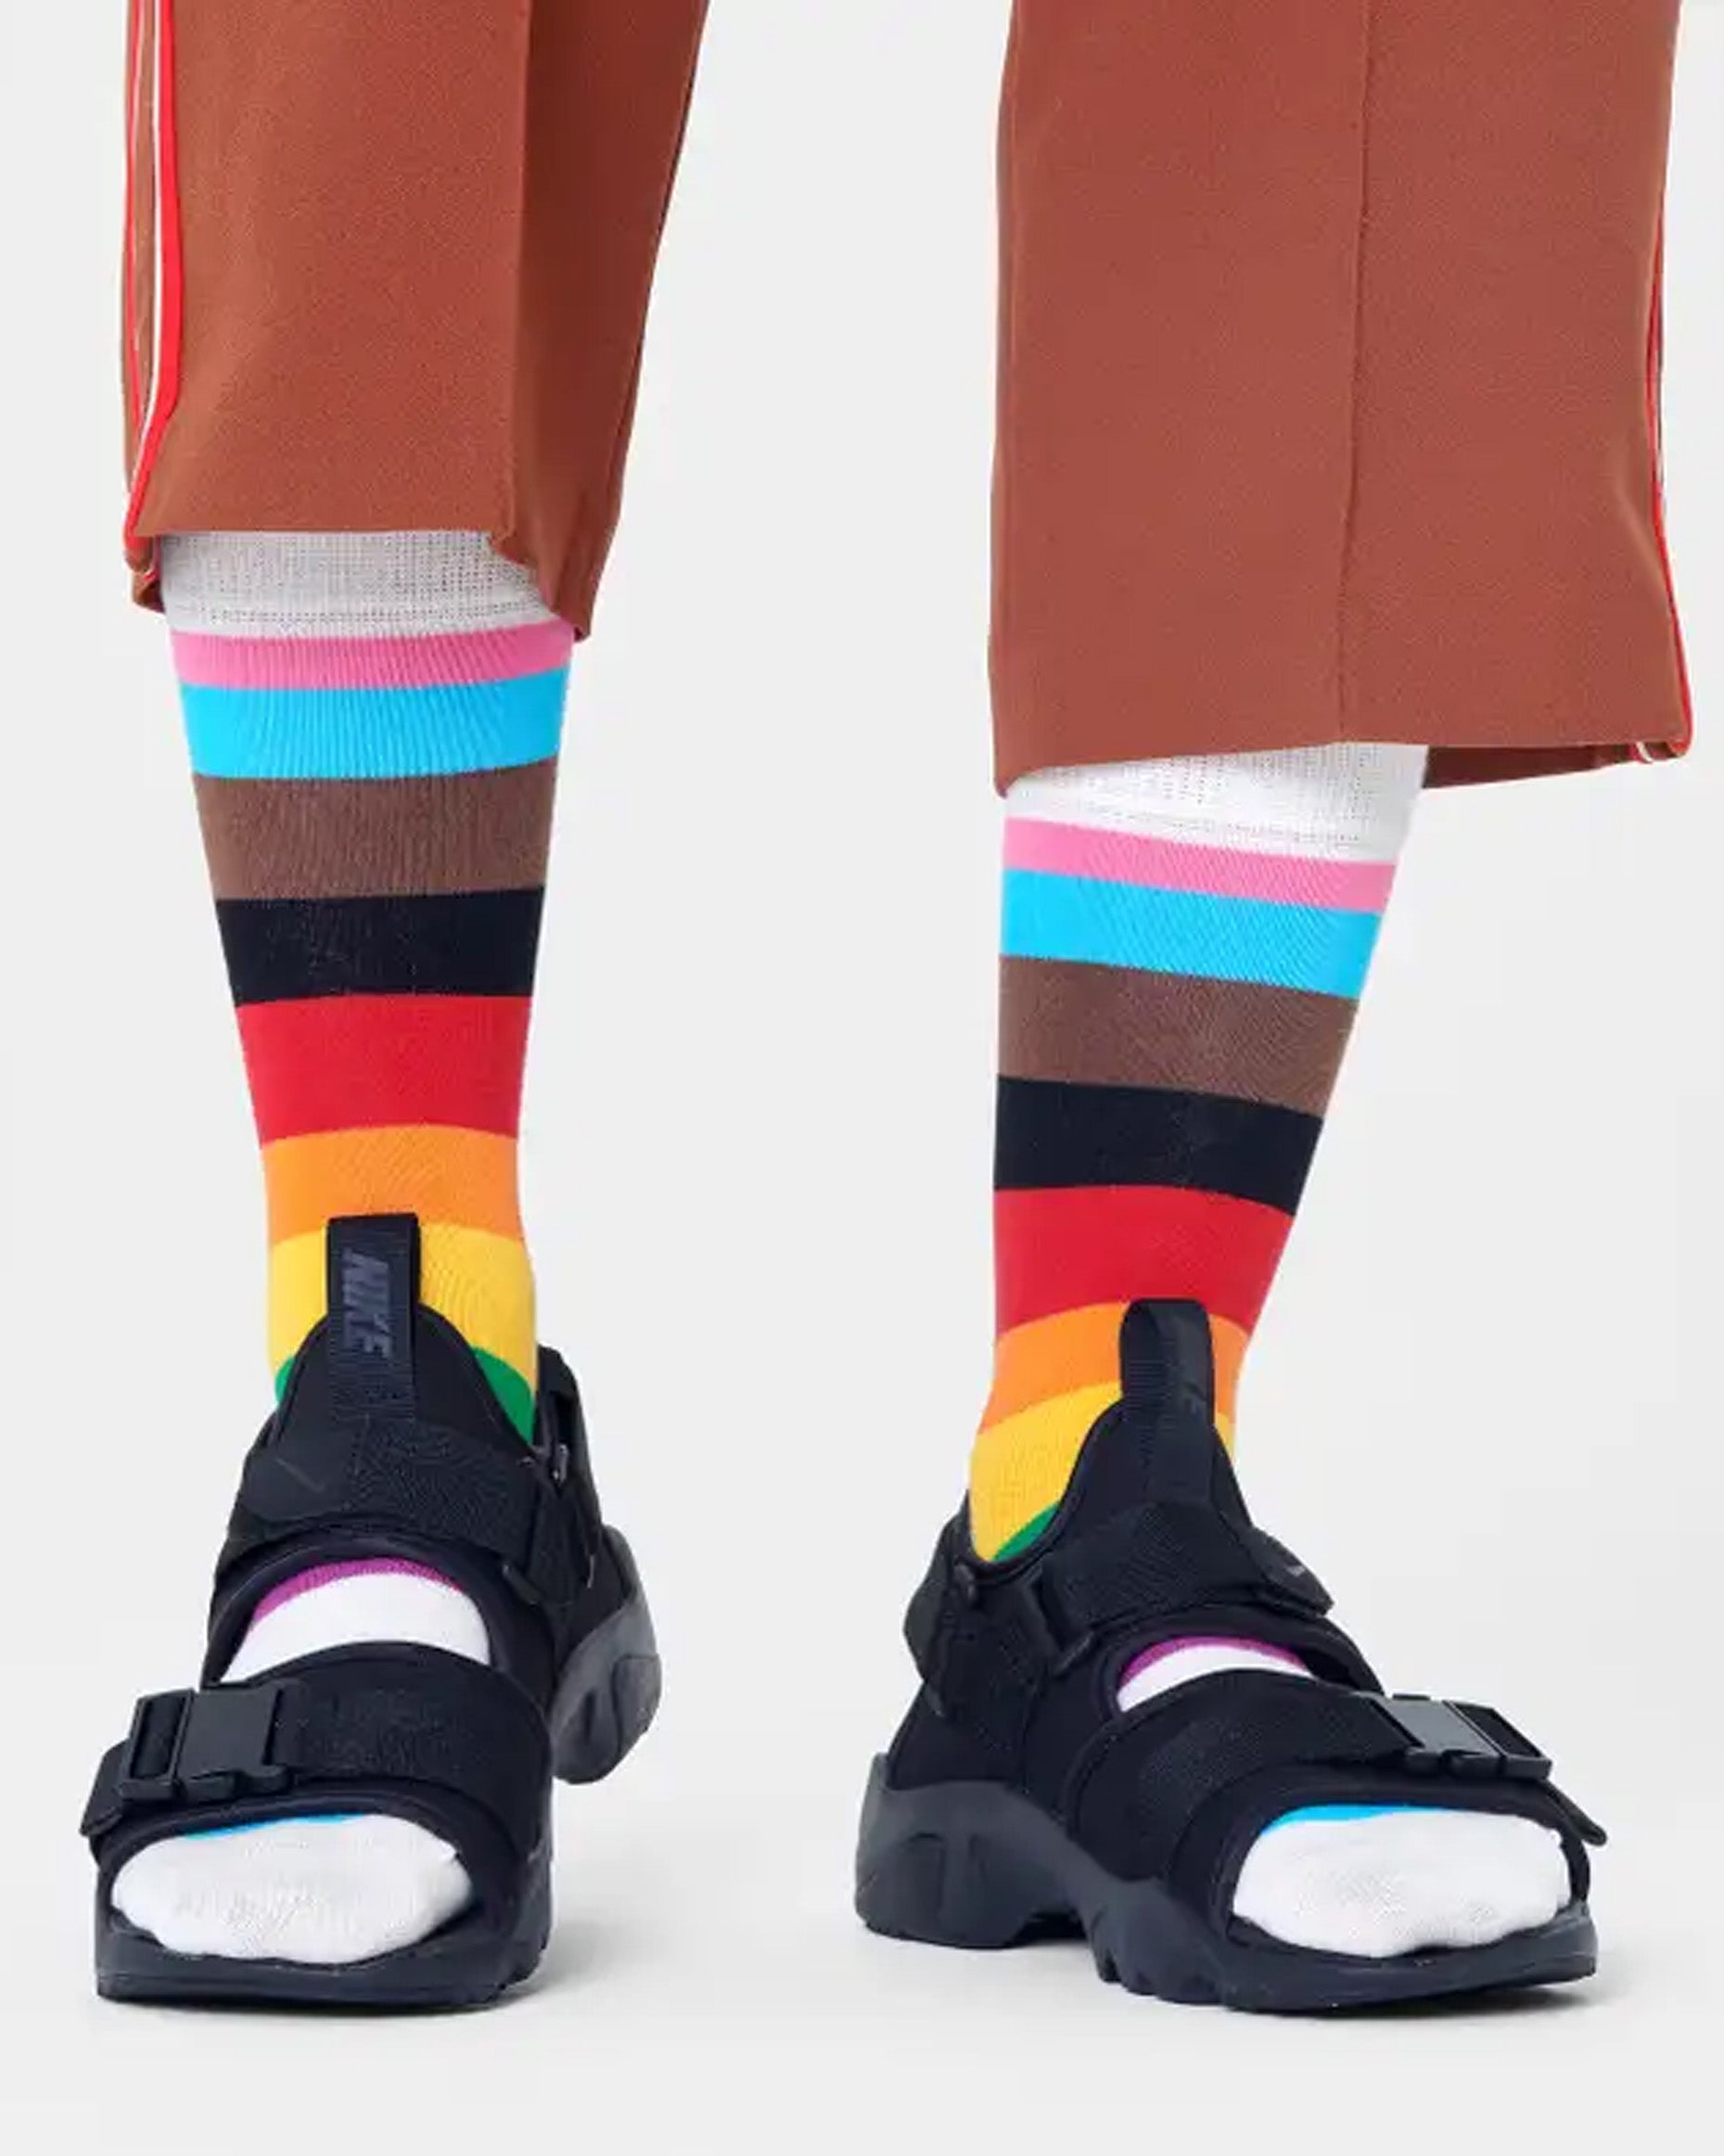 Happy Socks PRS01-0200 Pride Sock - Cream organic cotton crew length ankle socks with a horizontal LGBTQ+ rainbow stripe pattern. Worn with sandals and cropped pants.